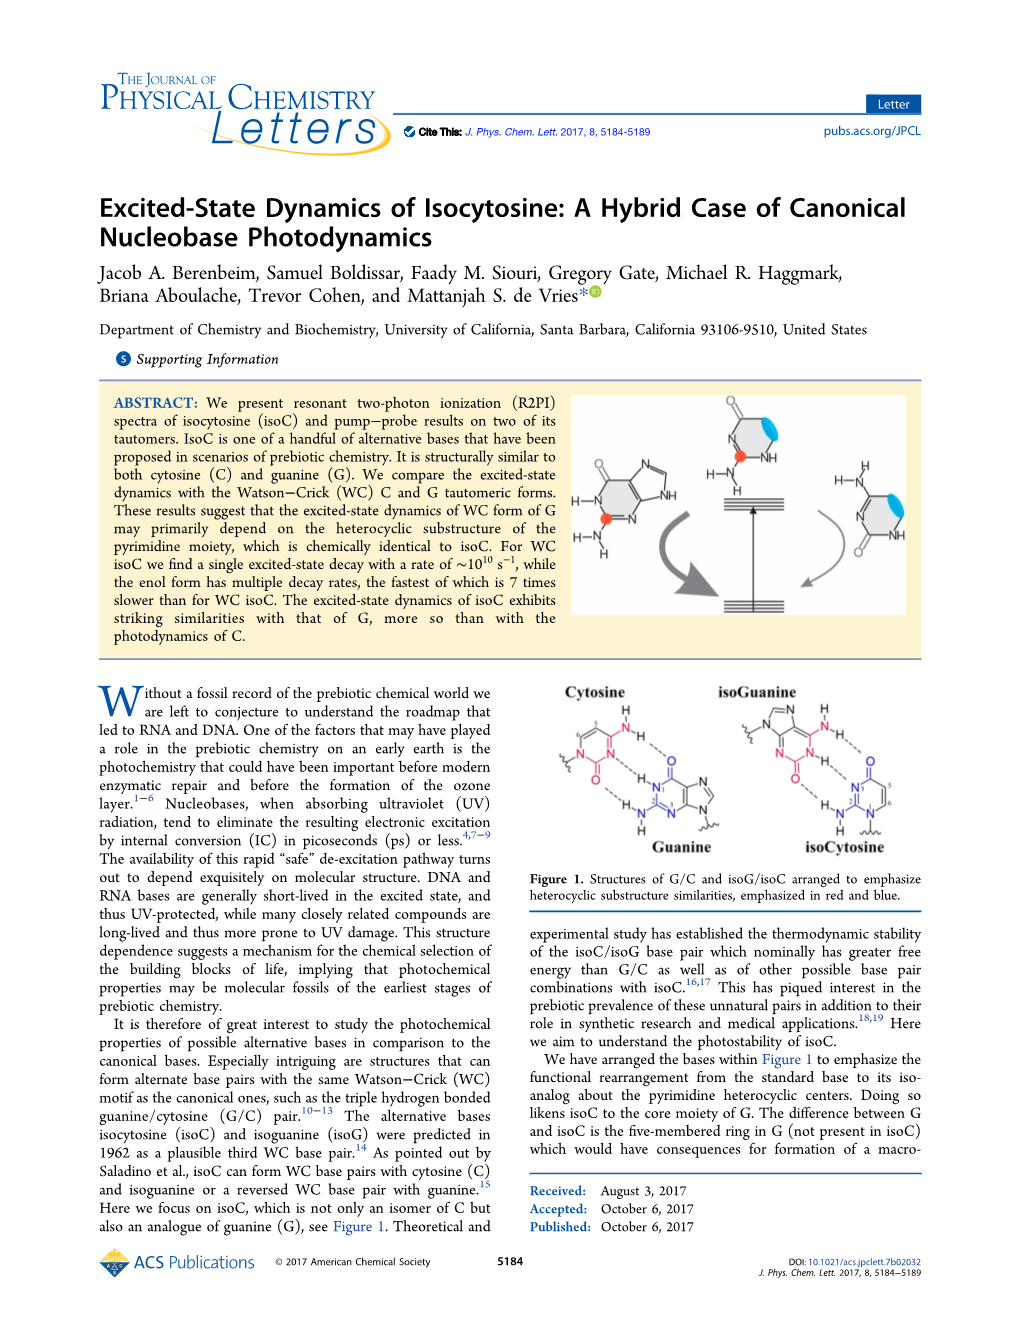 Excited-State Dynamics of Isocytosine: a Hybrid Case of Canonical Nucleobase Photodynamics Jacob A